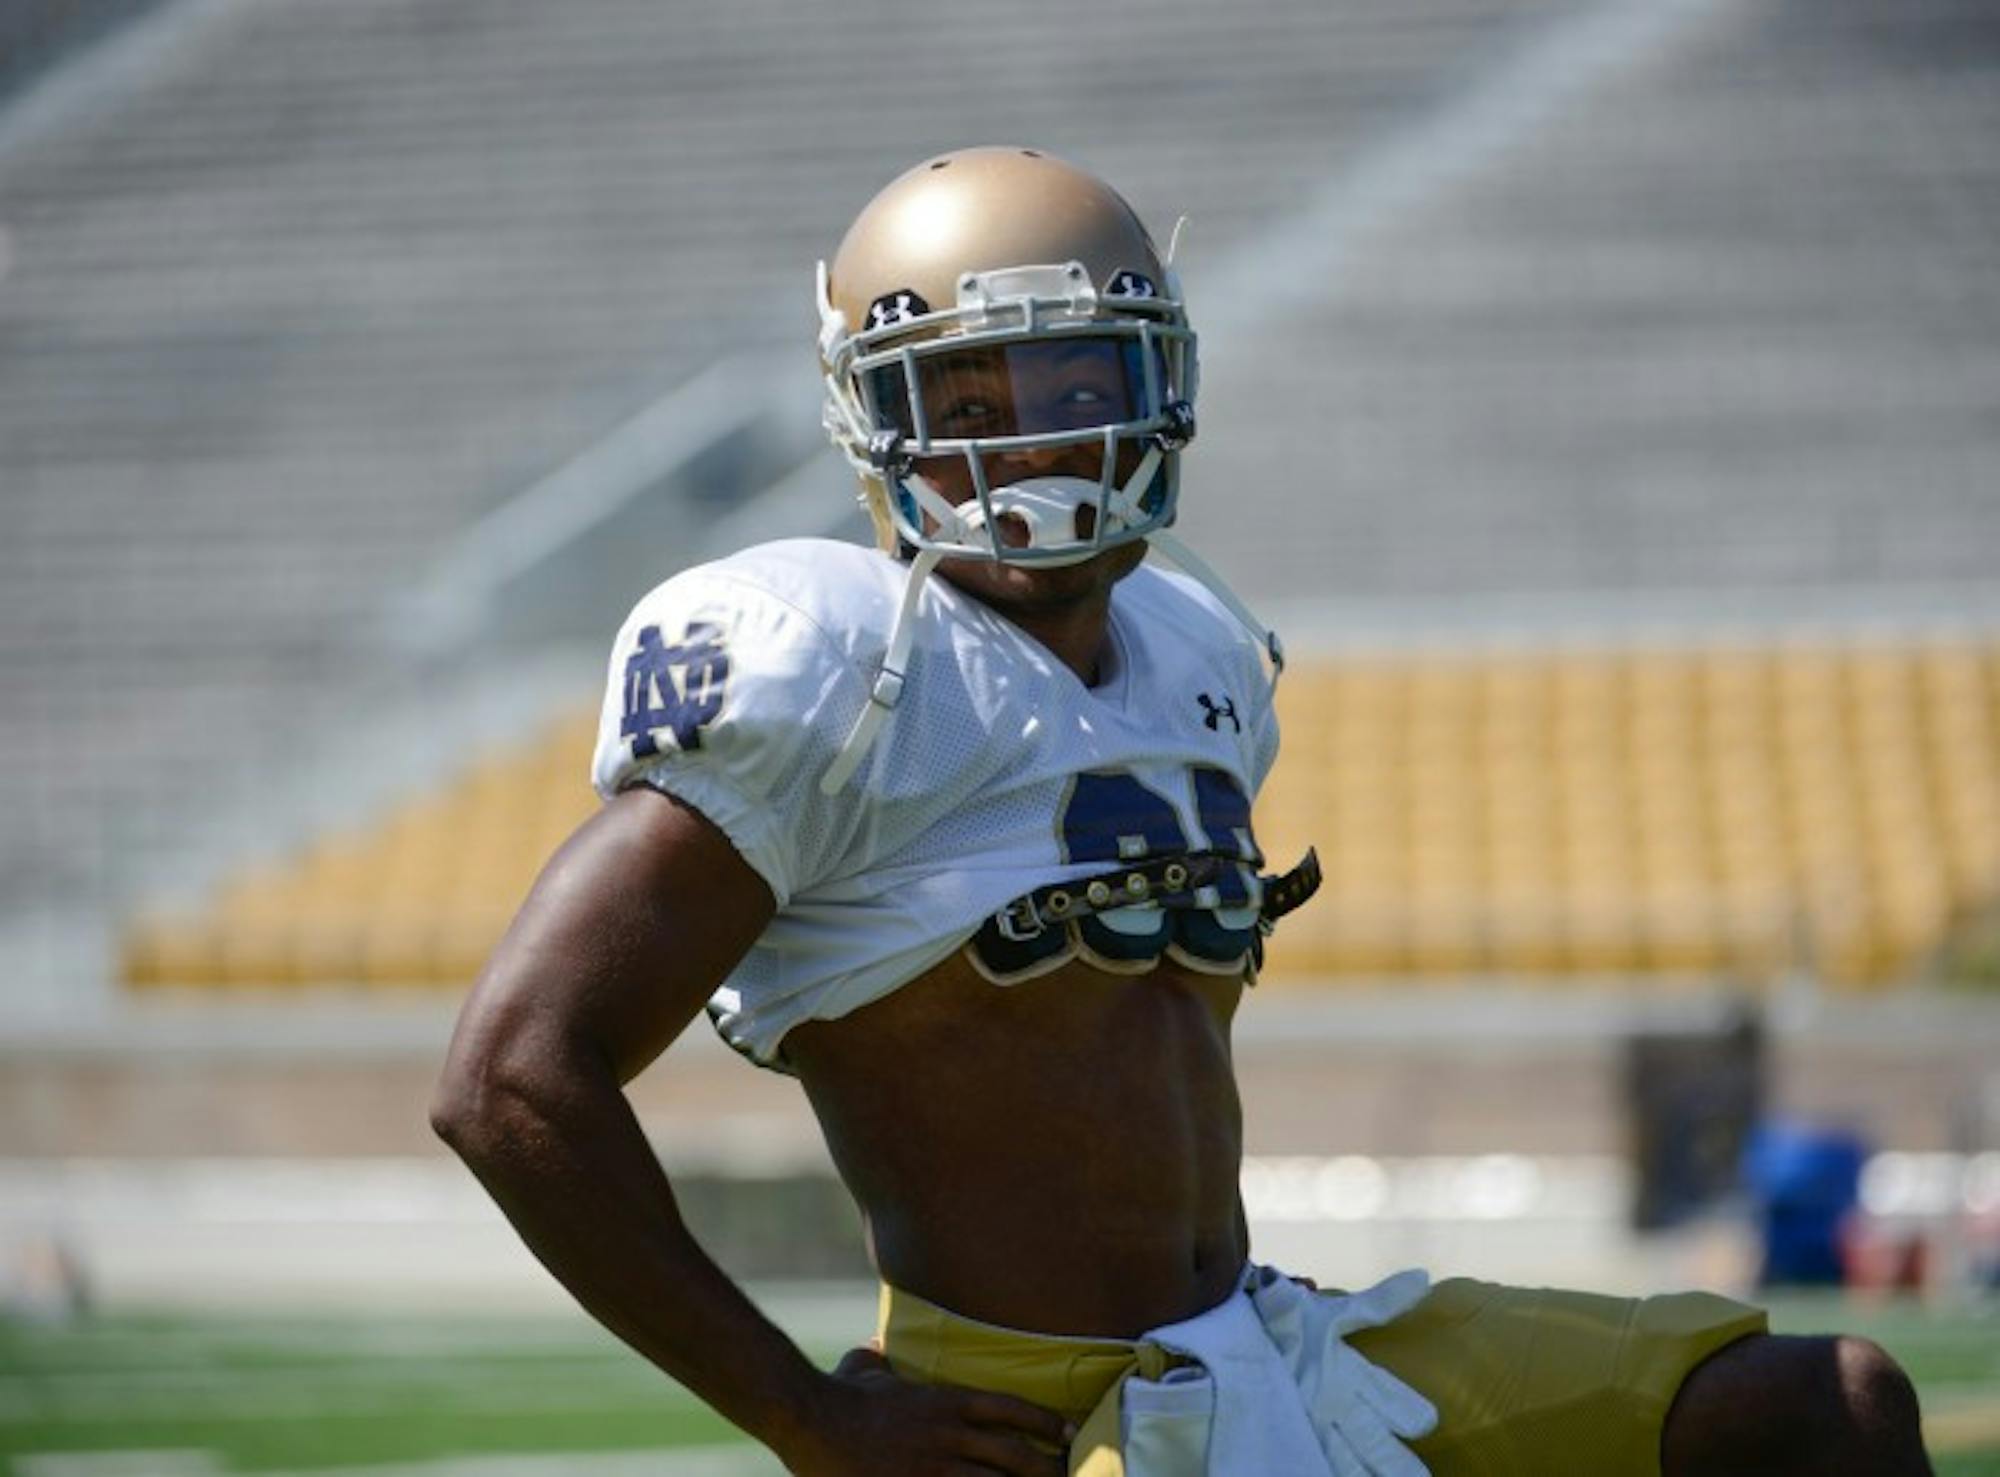 Senior cornerback KeiVarae Russell takes a break during a pracitce on Aug. 21 at LaBar Practice Field. Russell will make his first apperance for the Irish in over a year against Texas on Saturday.